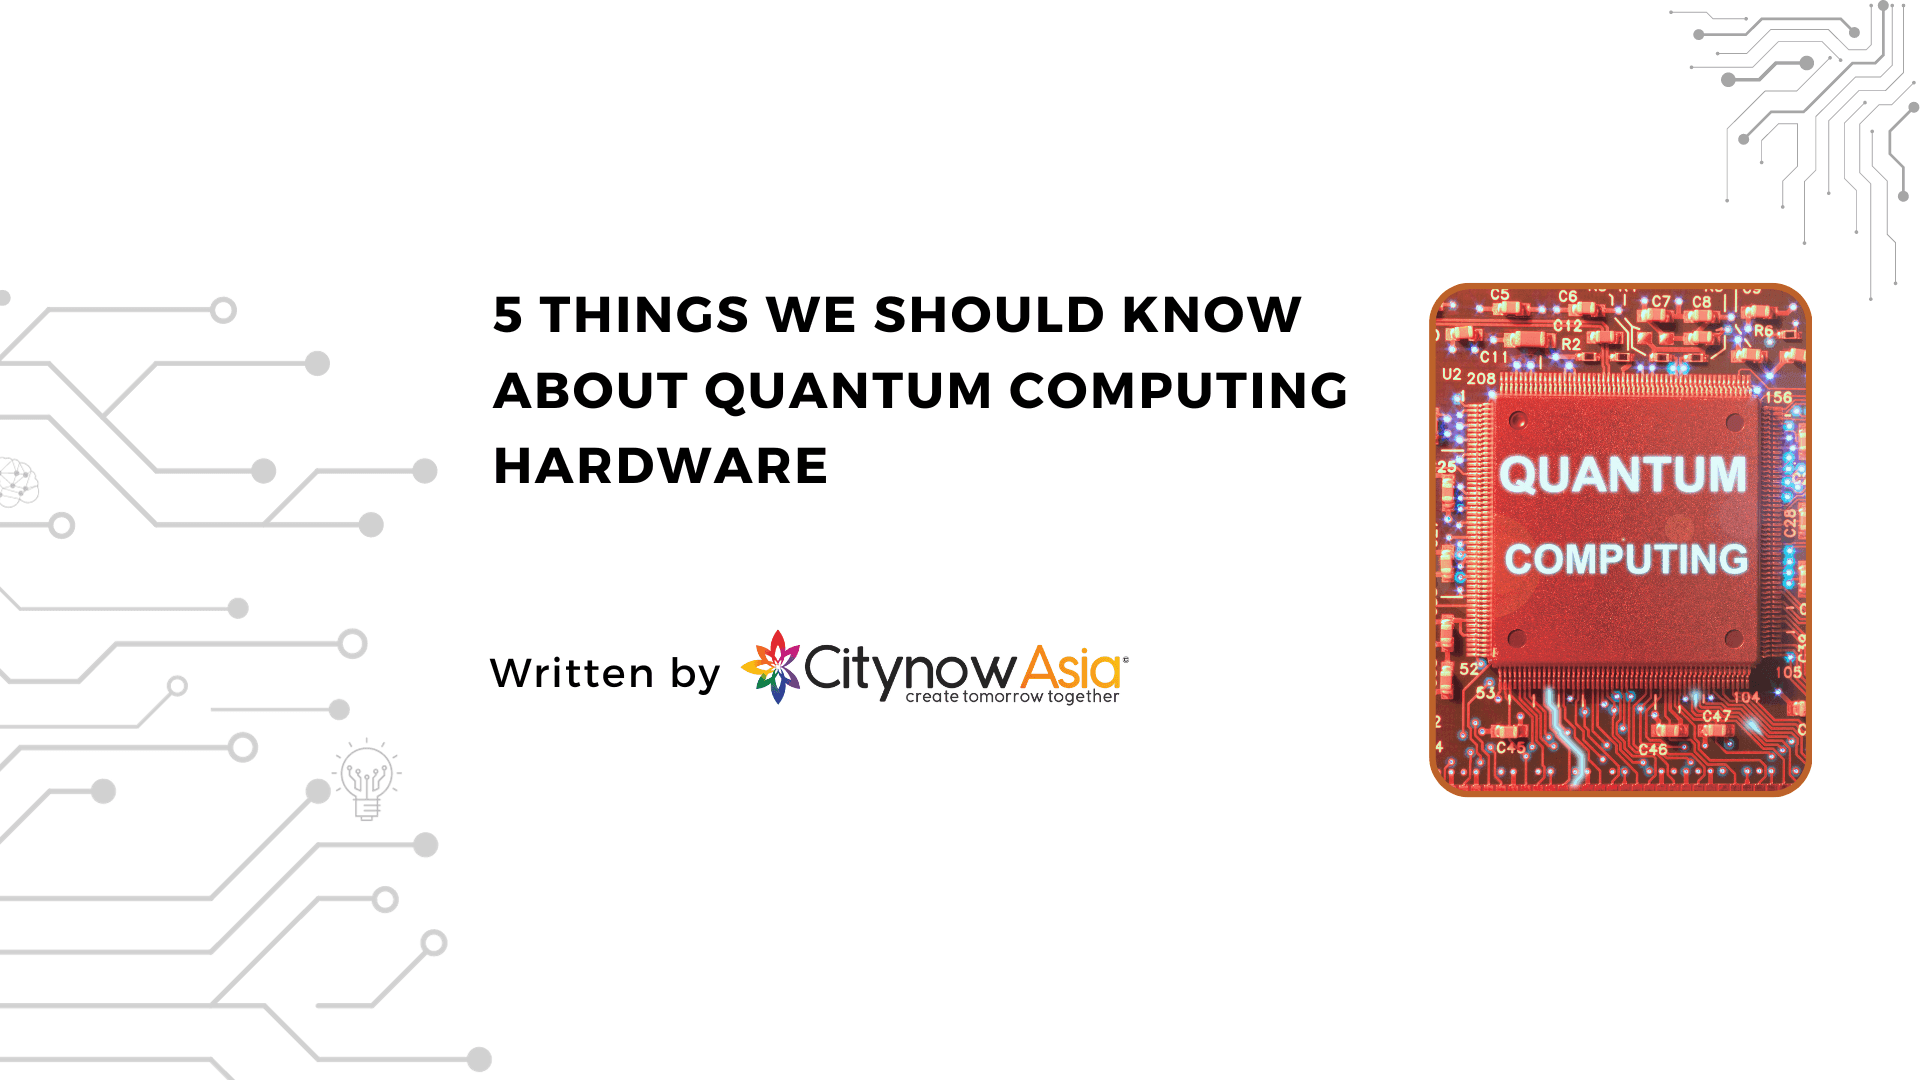 5 things we should know about Quantum Computing Hardware